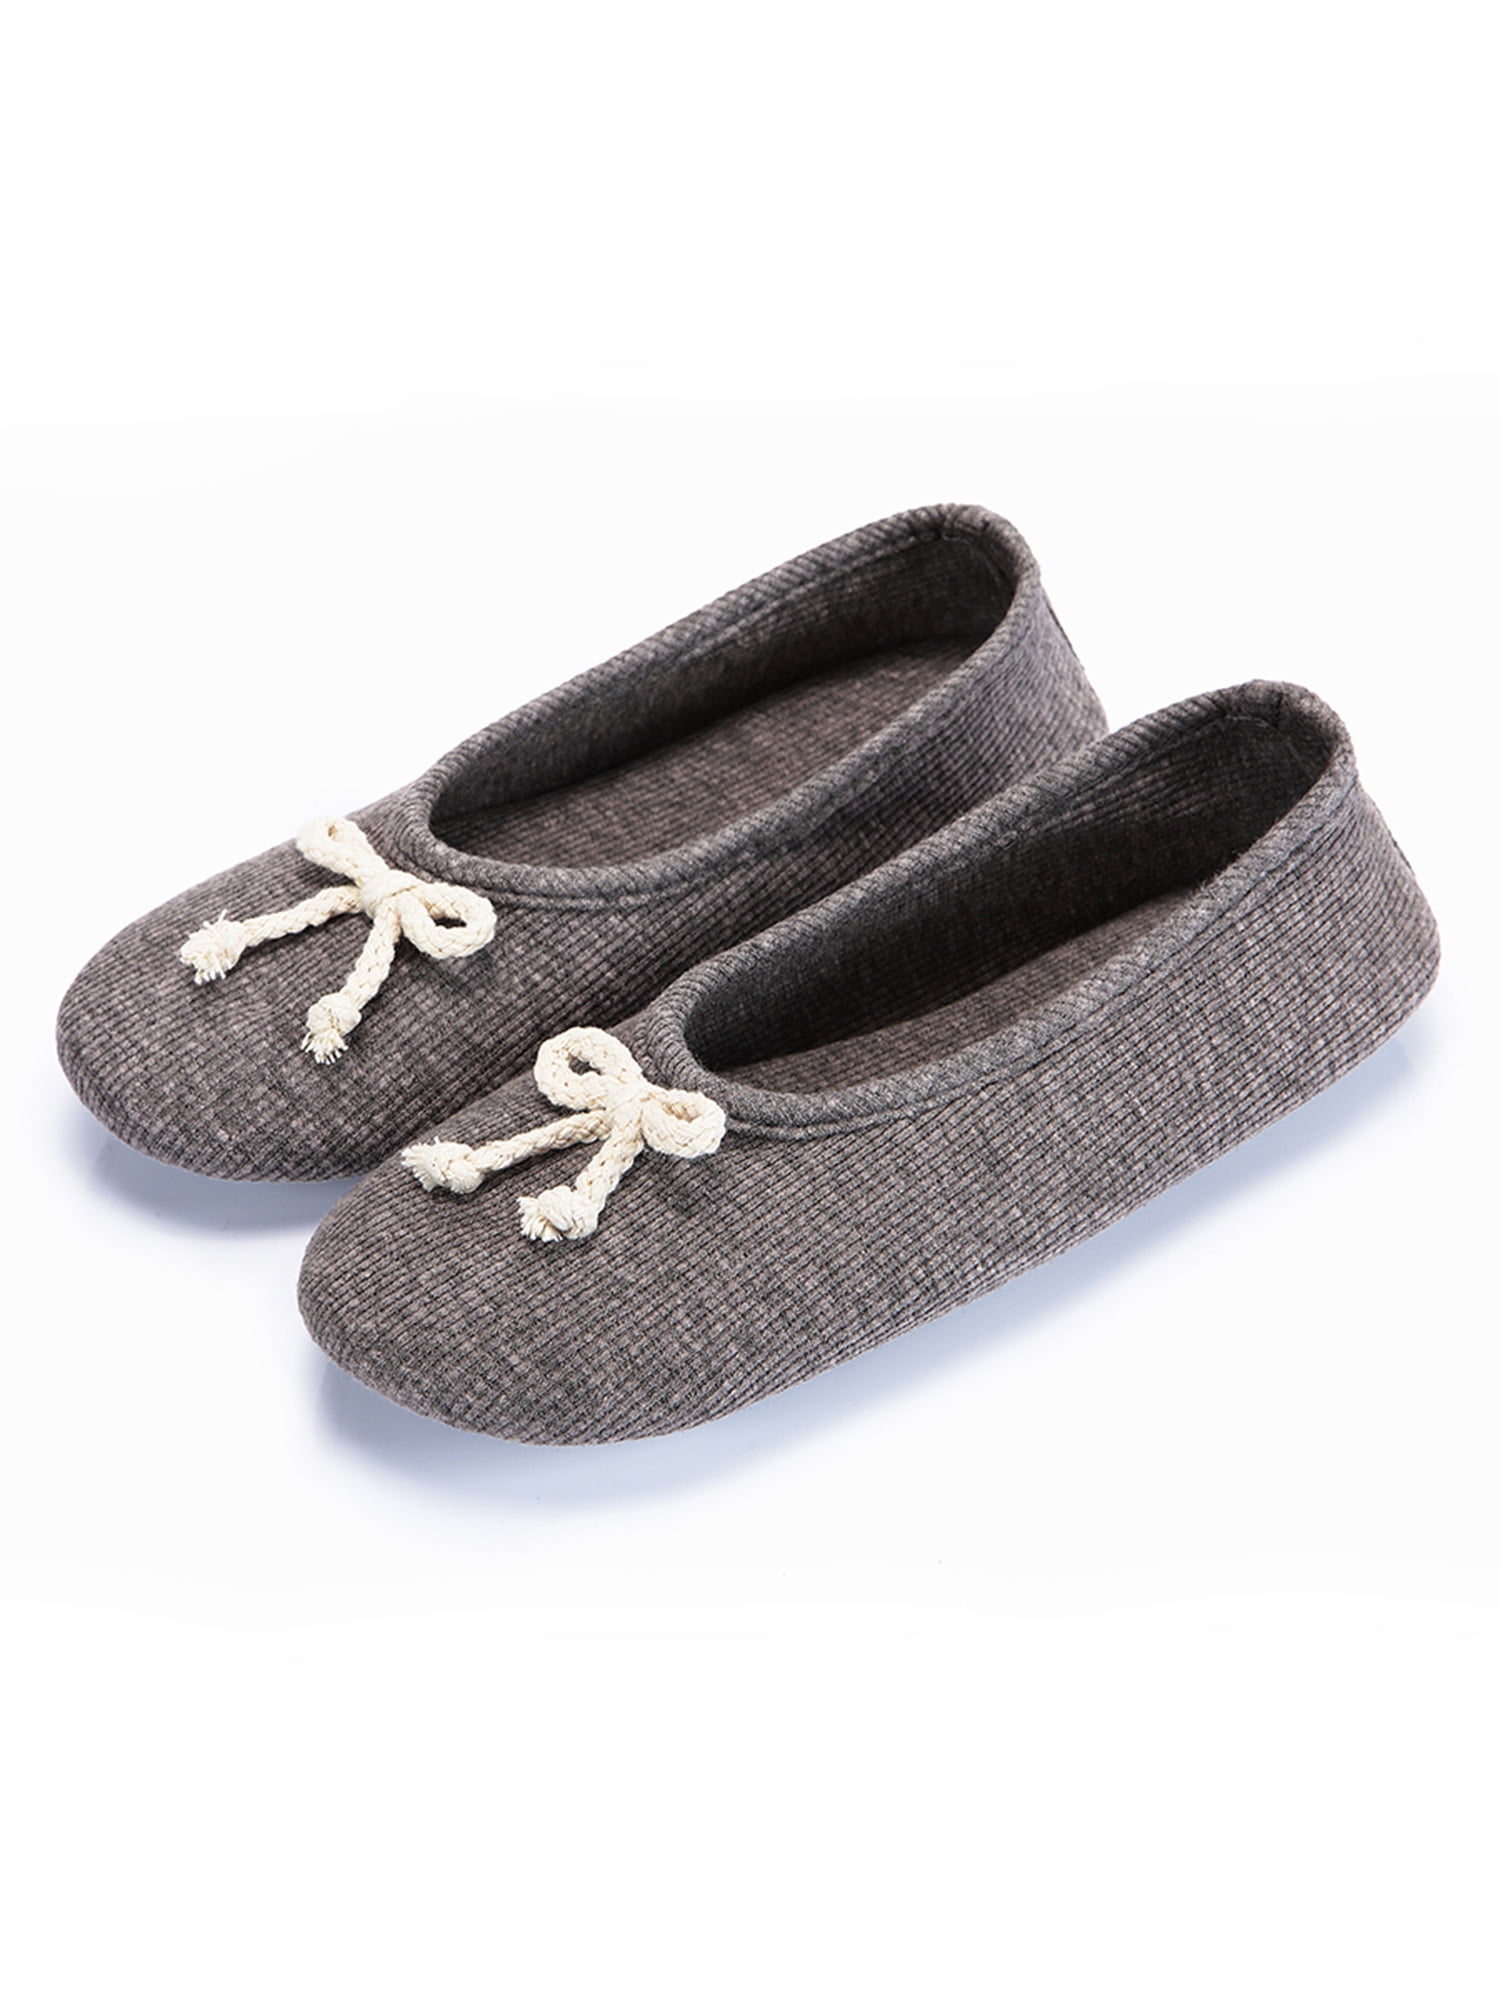 Women's Comfort Knit Memory Foam House Shoes Light Weight Terry Cloth Loafer Slippers w/Anti-Skid Rubber Sole 